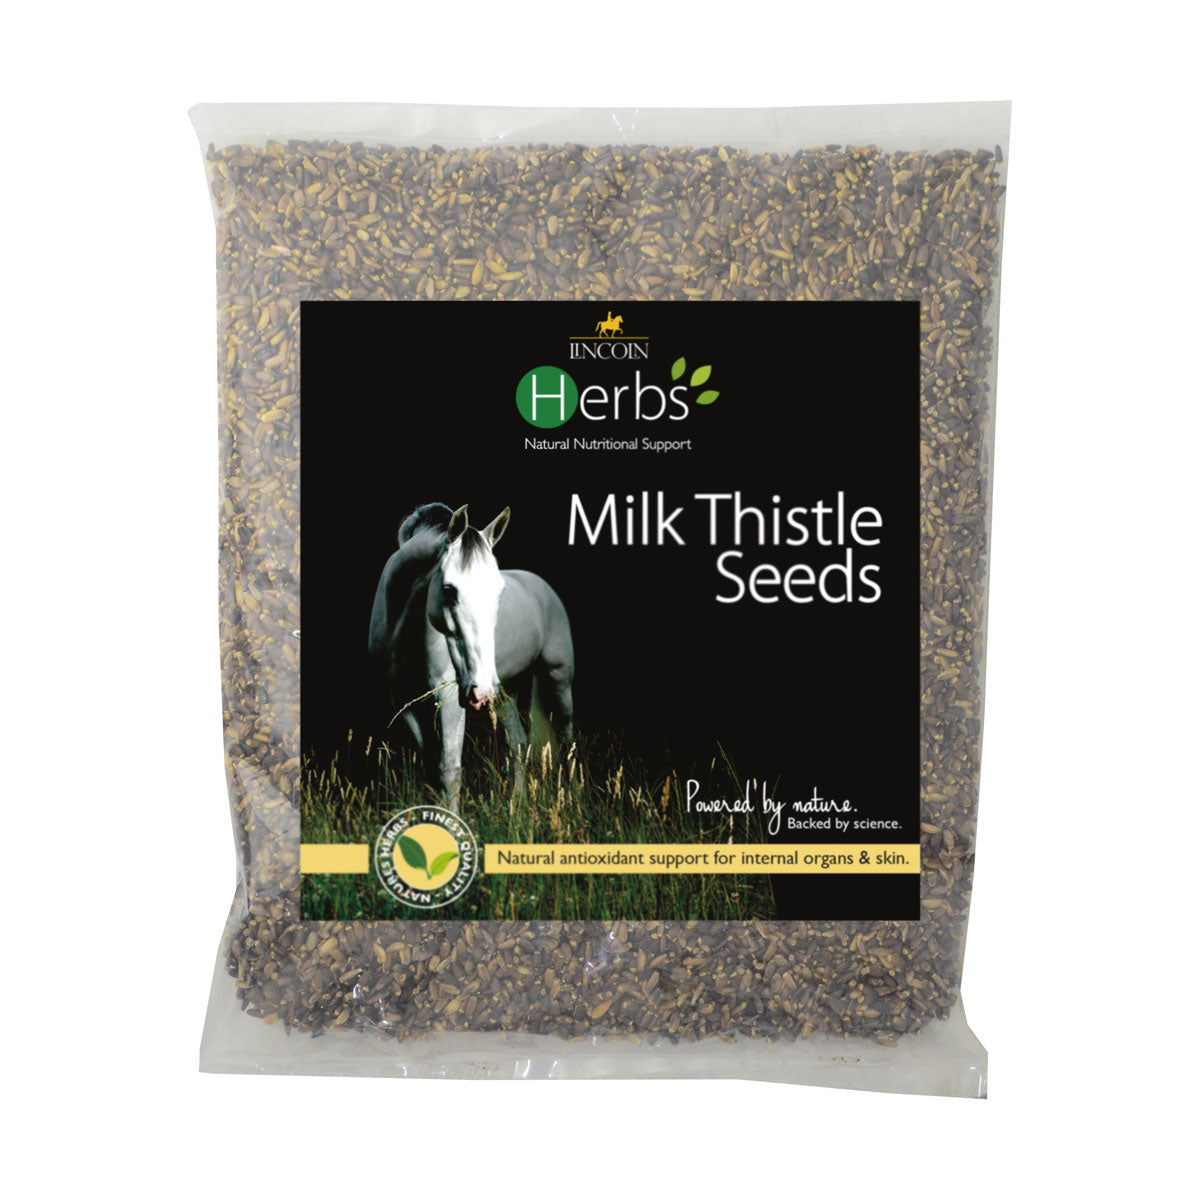 Lincoln Herbs Milk Thistle Seeds